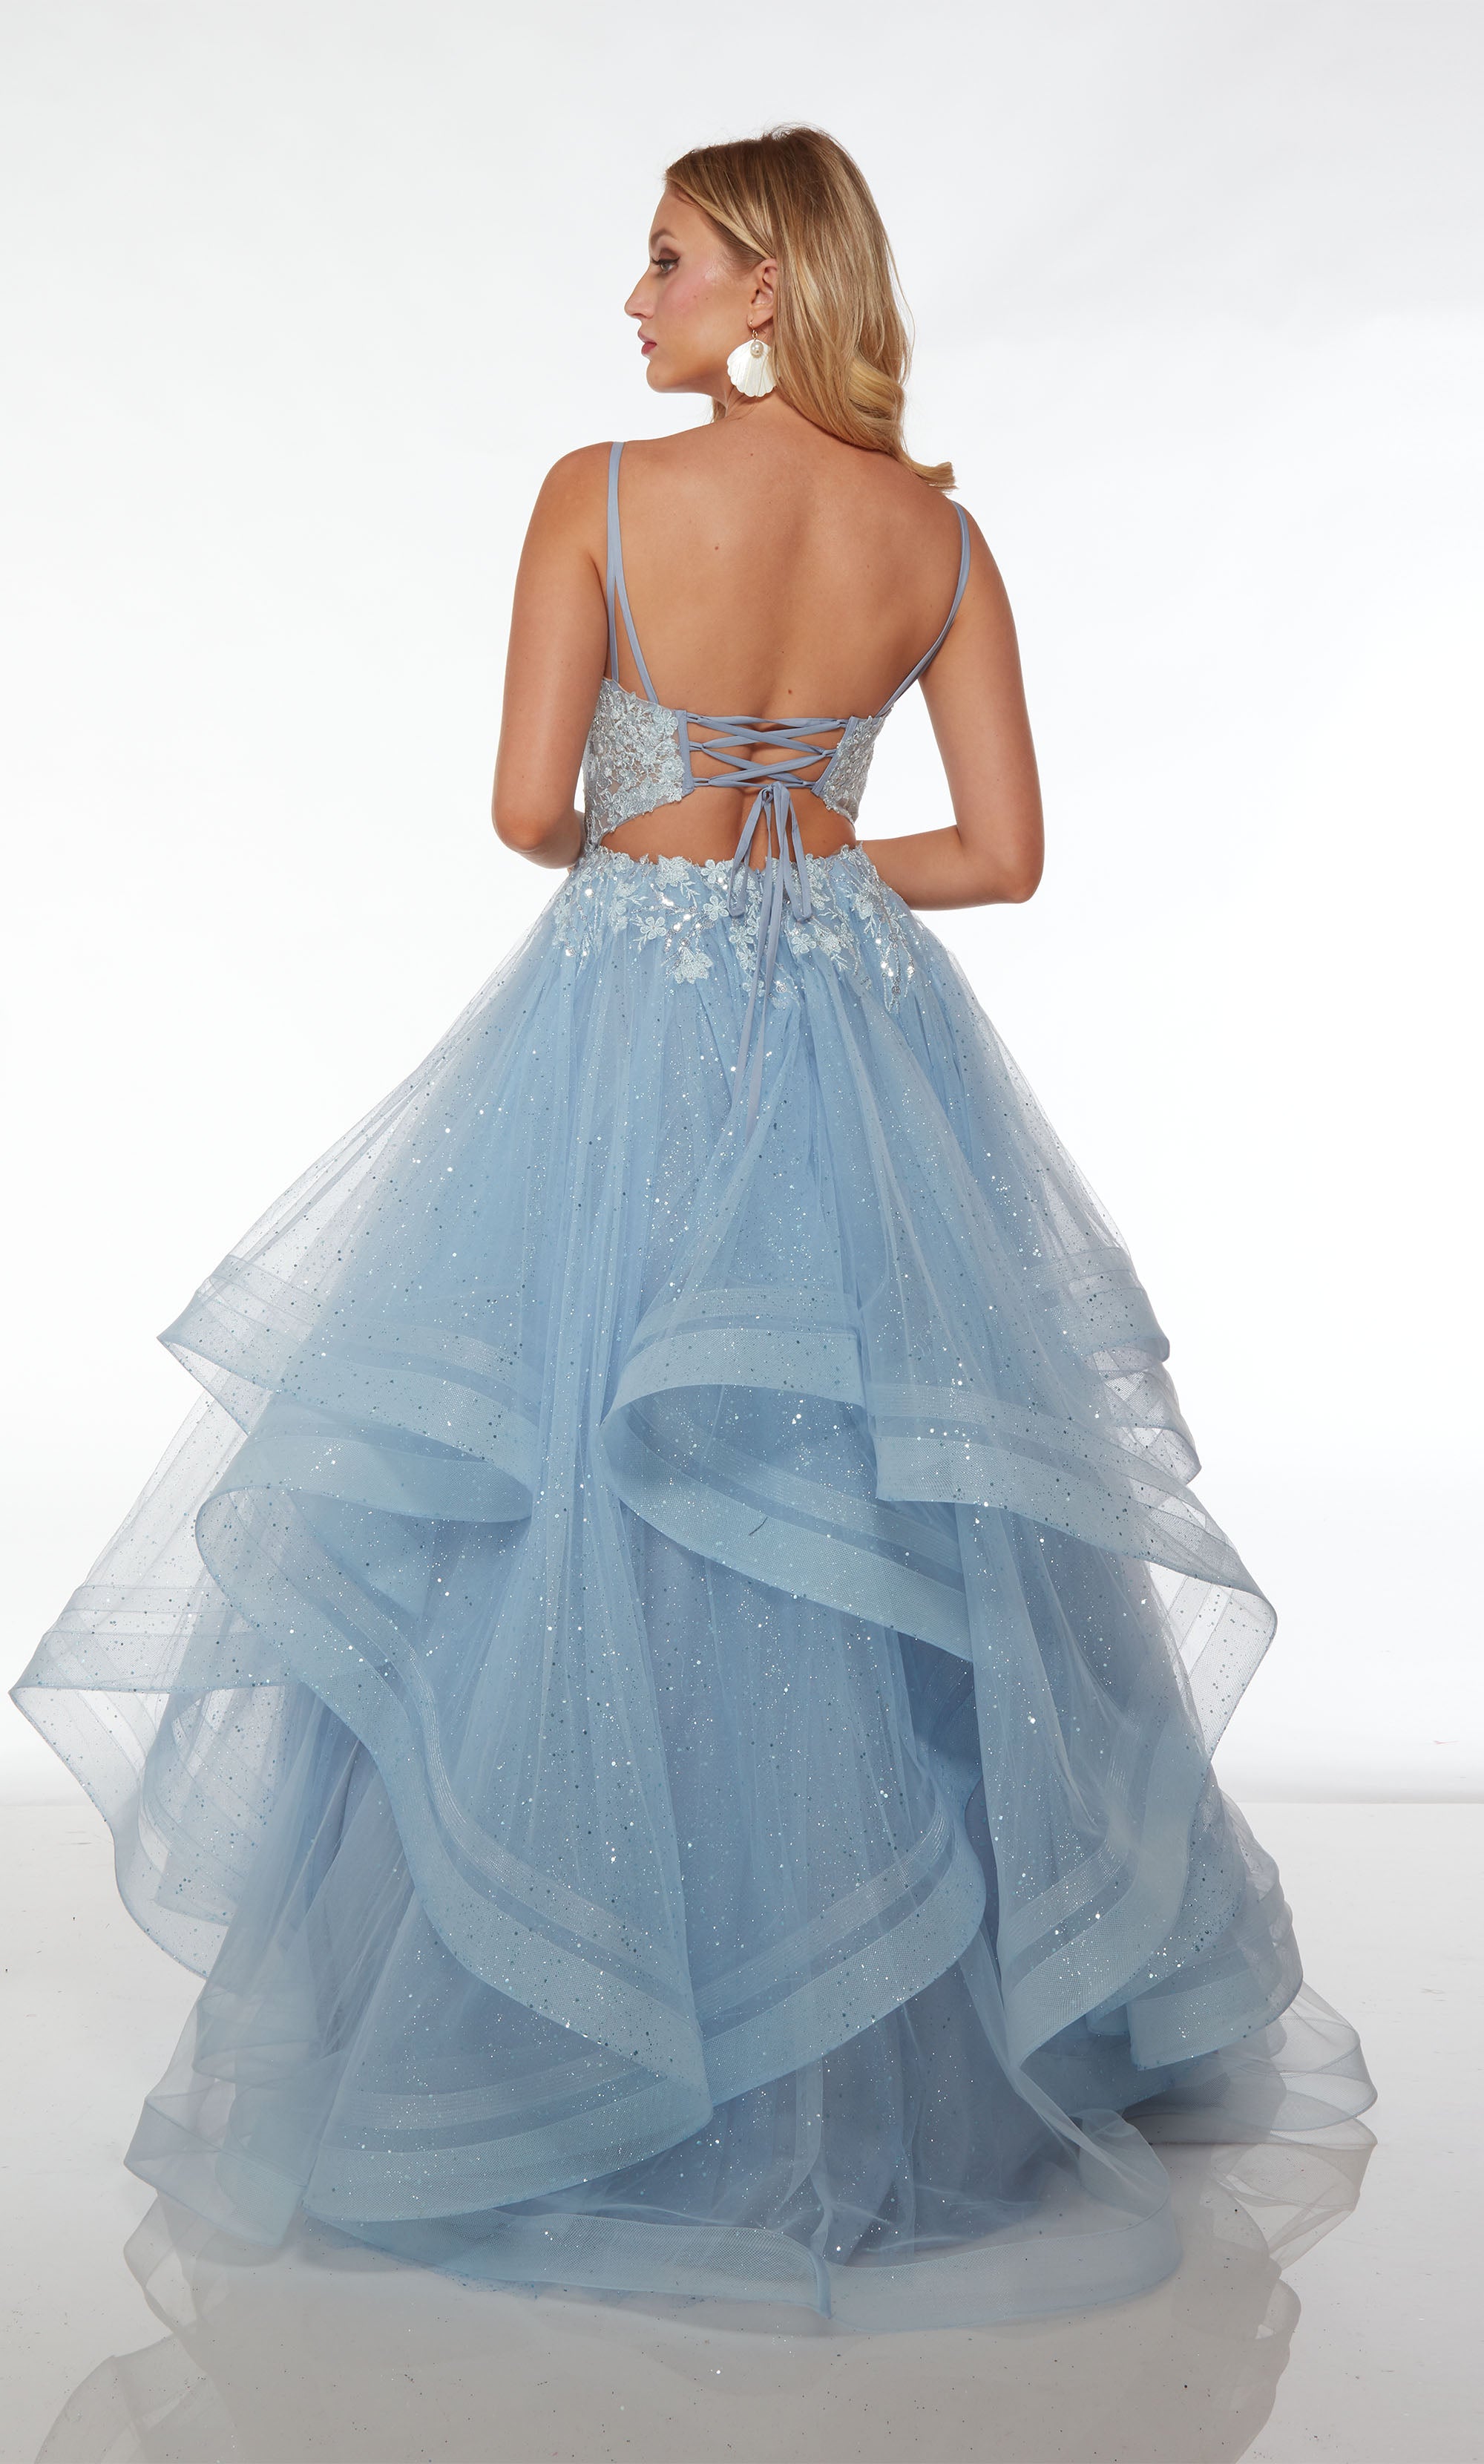 Blue prom dress with an sheer floral lace corset bodice, lace up back, and ruffled skirt in sequined lace-glitter tulle fabric.